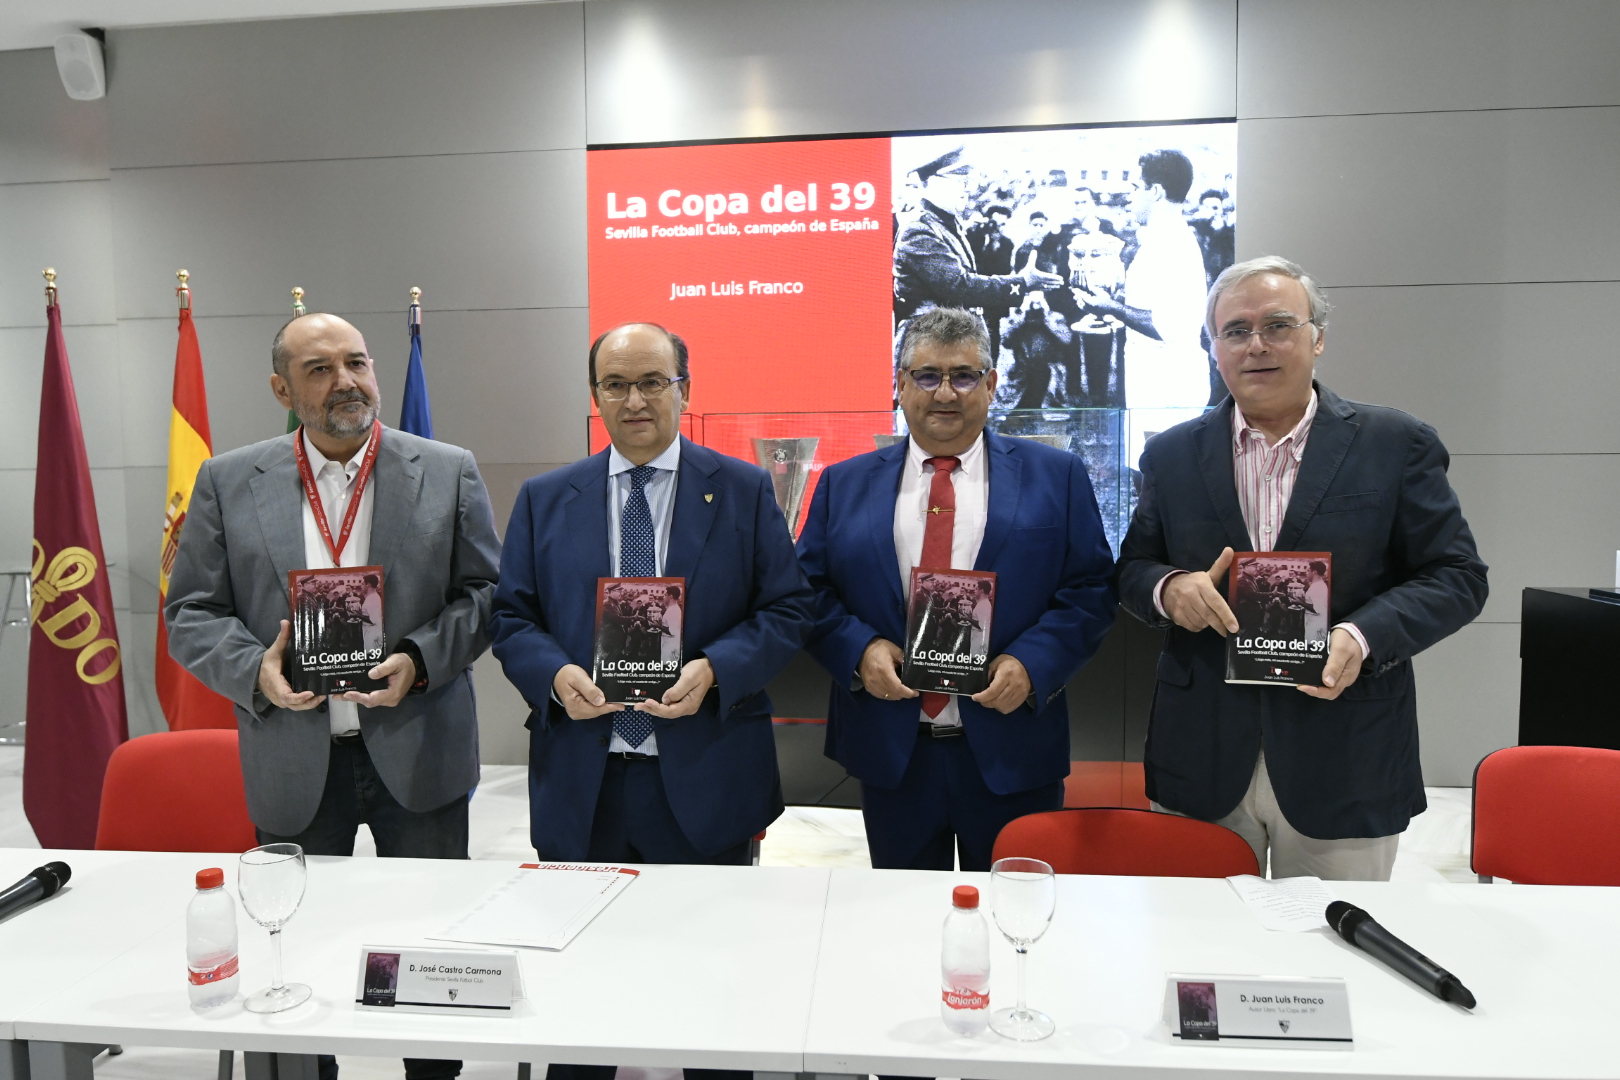 Presentation of the book 'The Cup of 39'